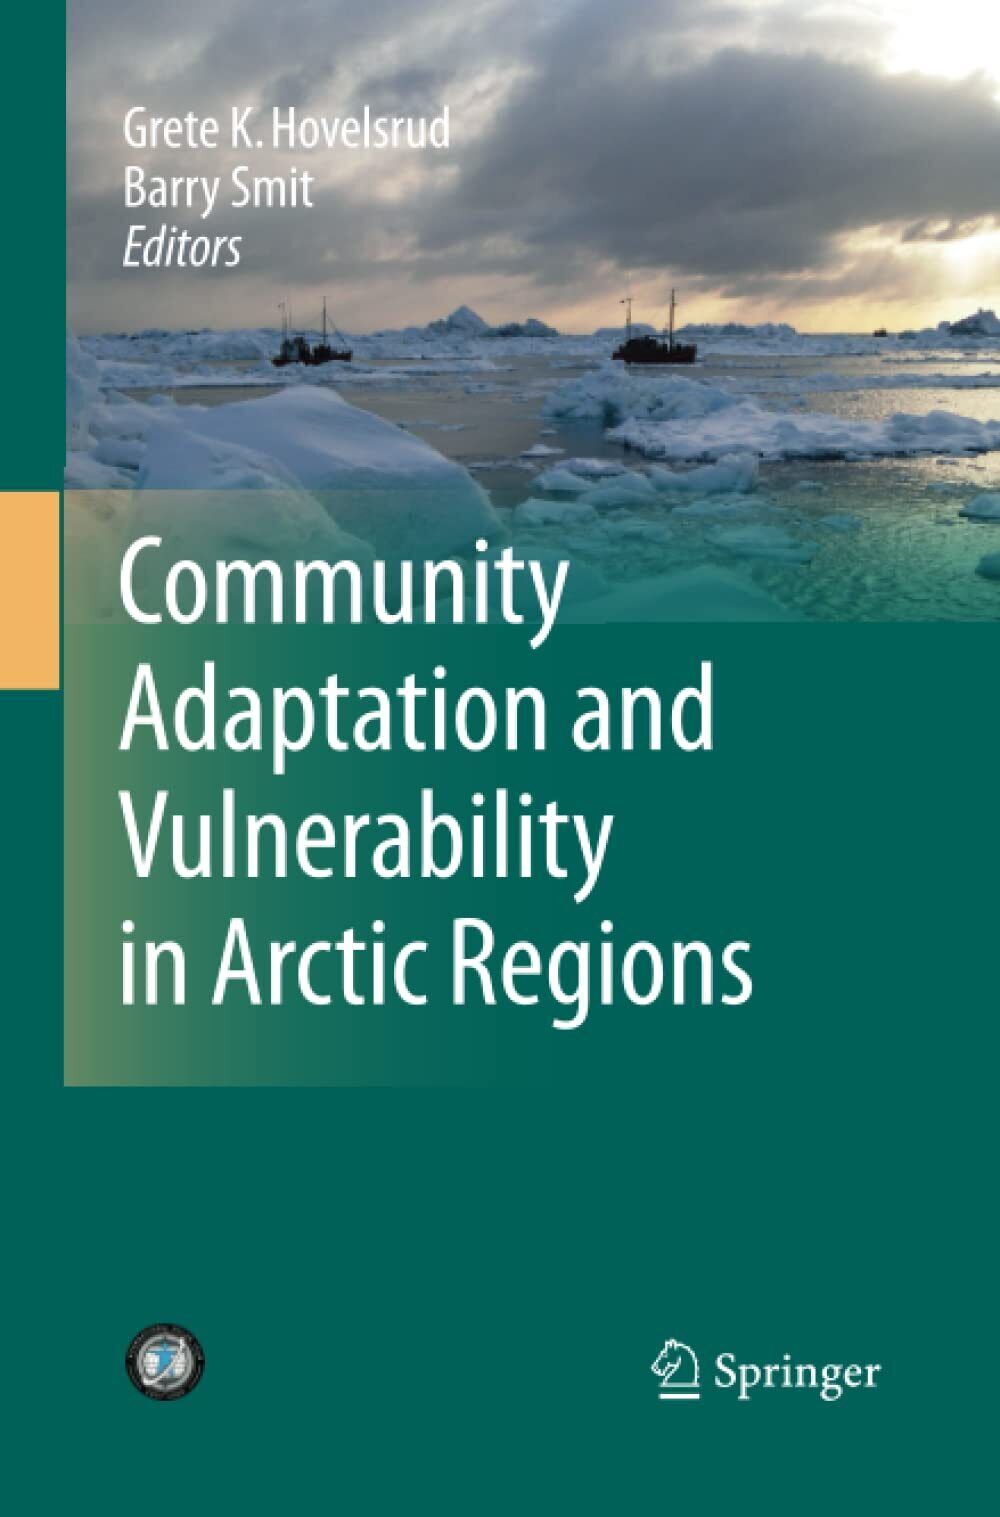 Community Adaptation and Vulnerability in Arctic Regions - Springer, 2014